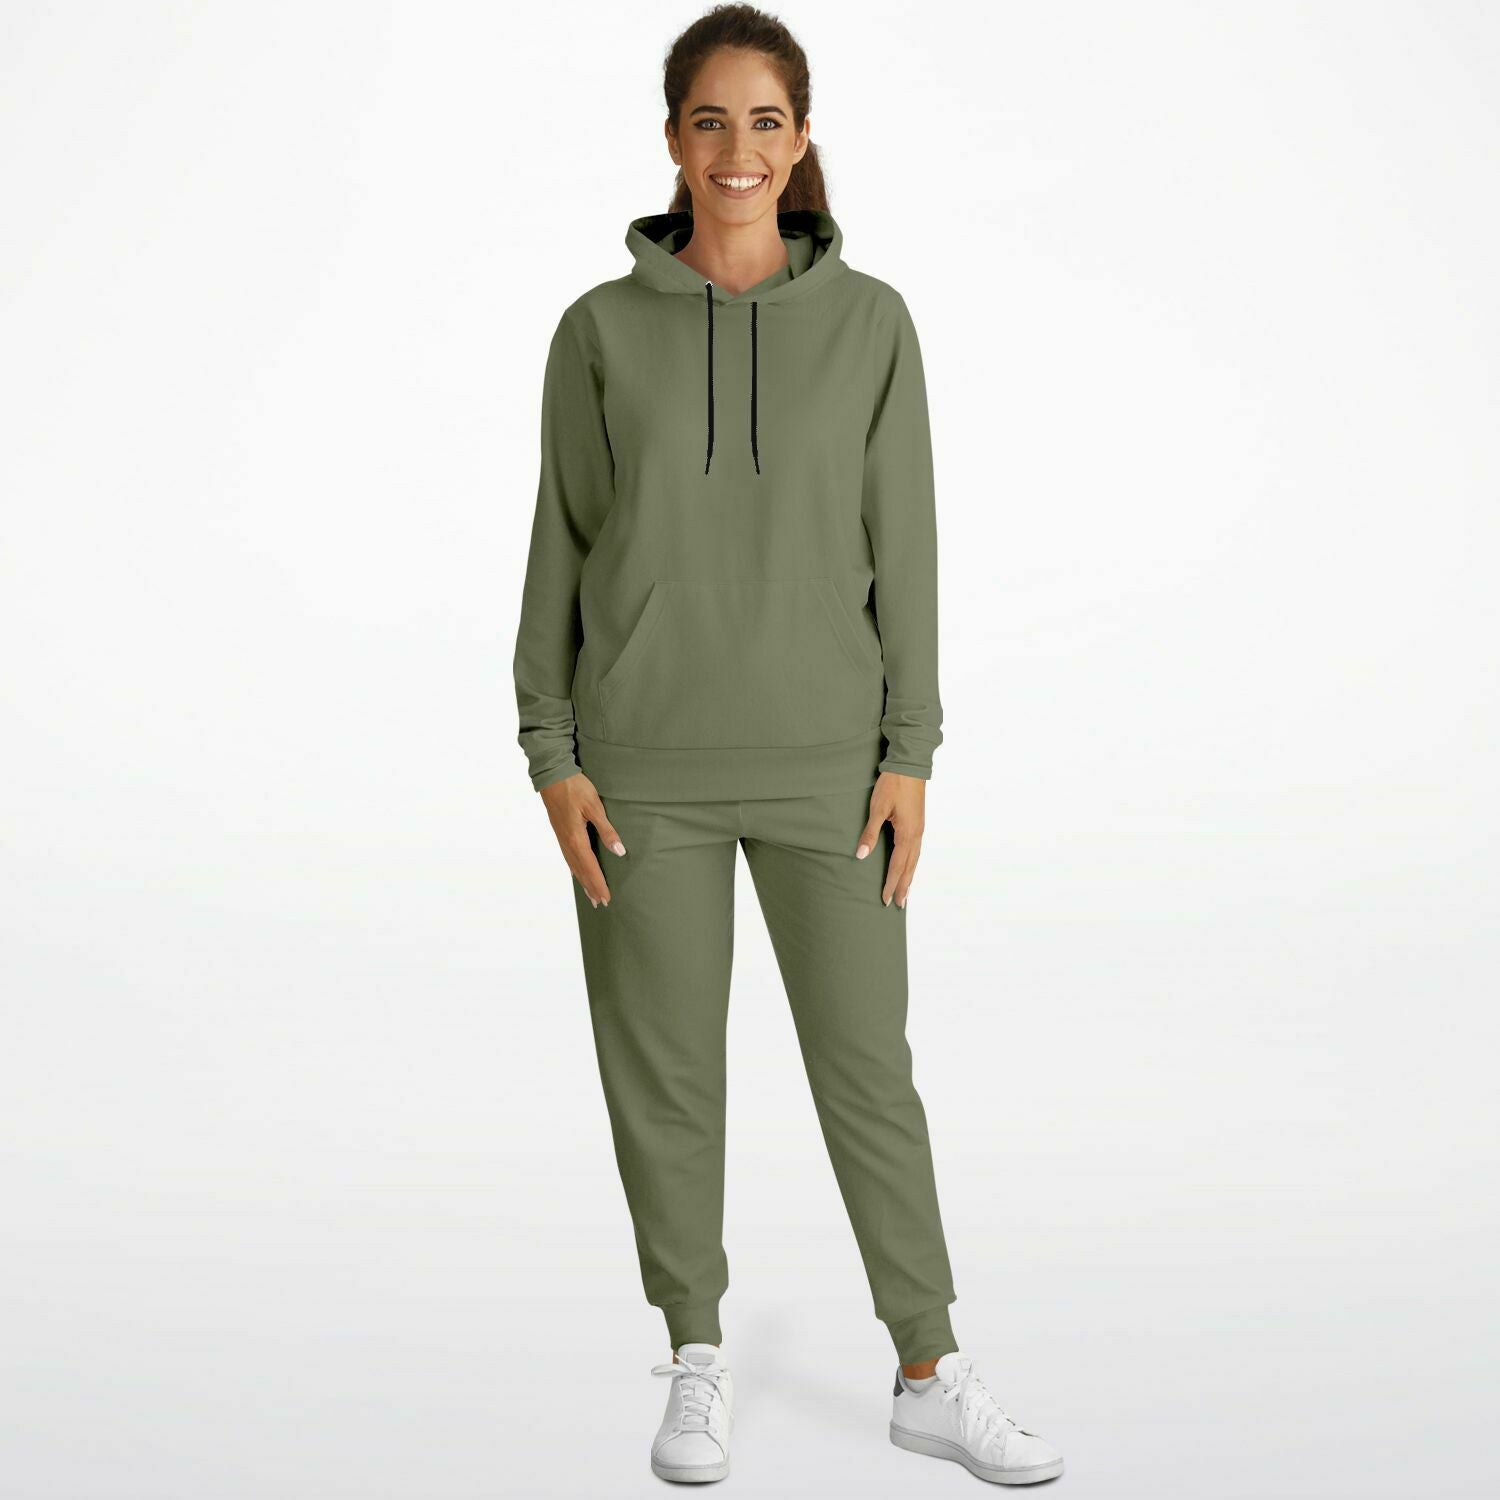 Vintage Dark Green Women's Hoodie and Jogger Set - XS / XS - Sport Finesse